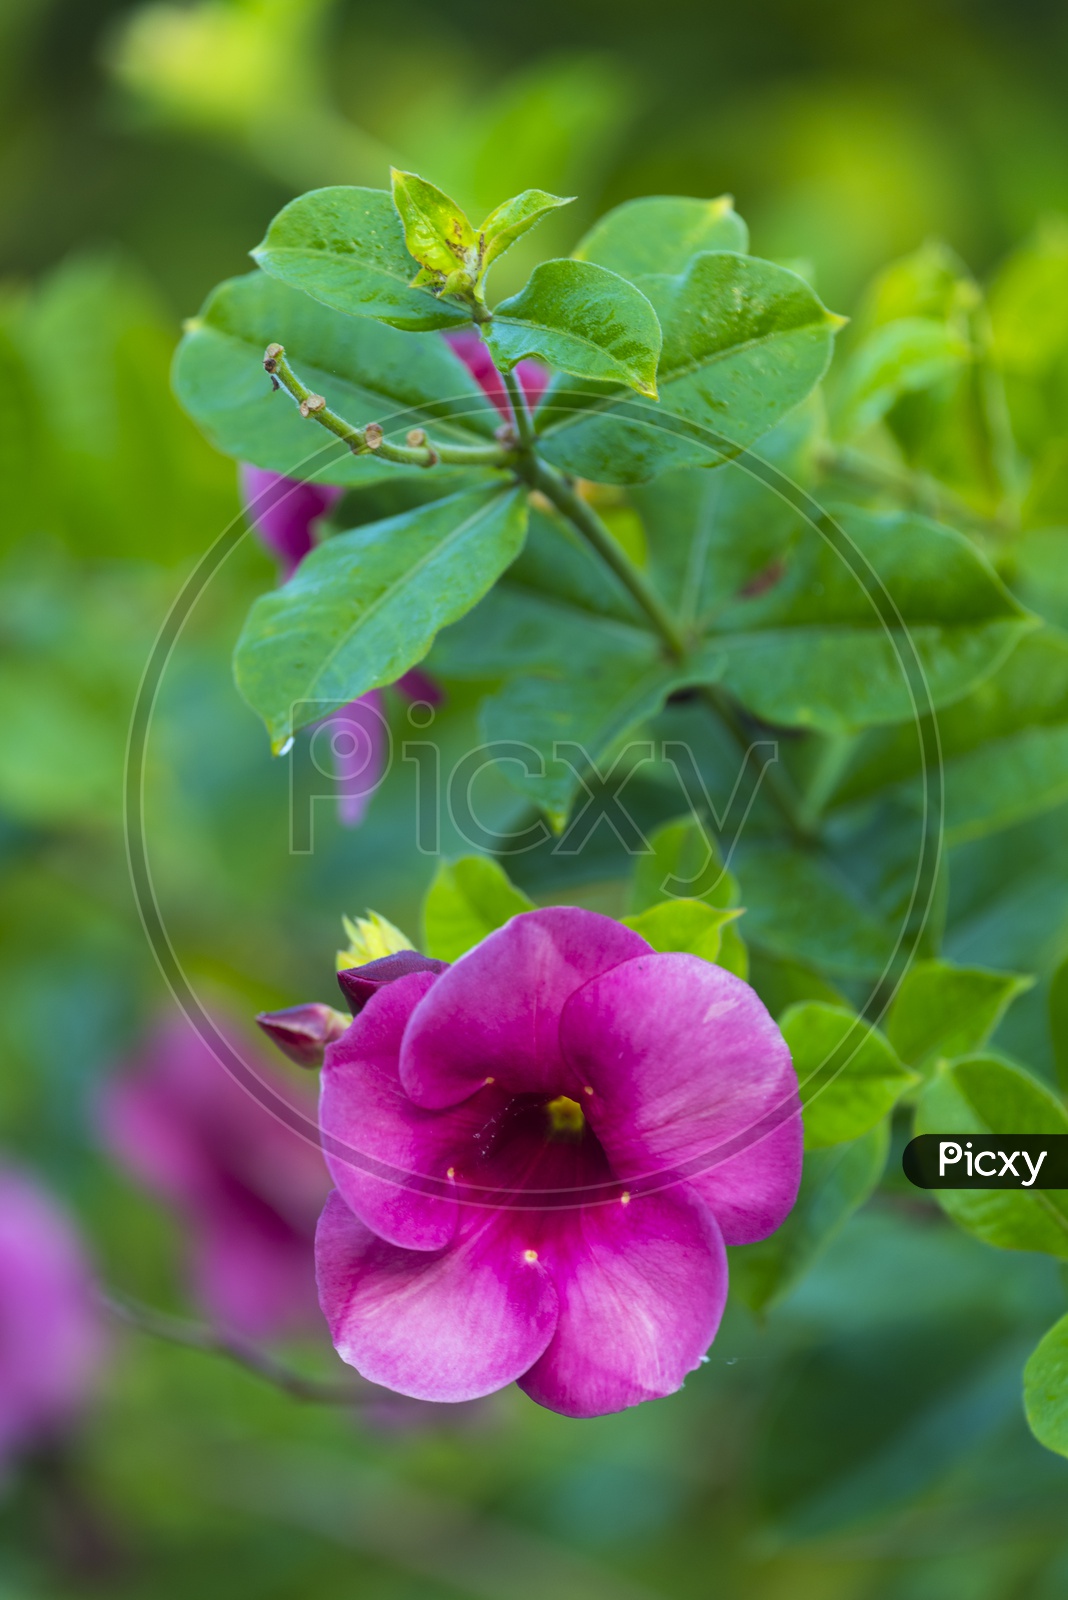 Impatiens flower with green background